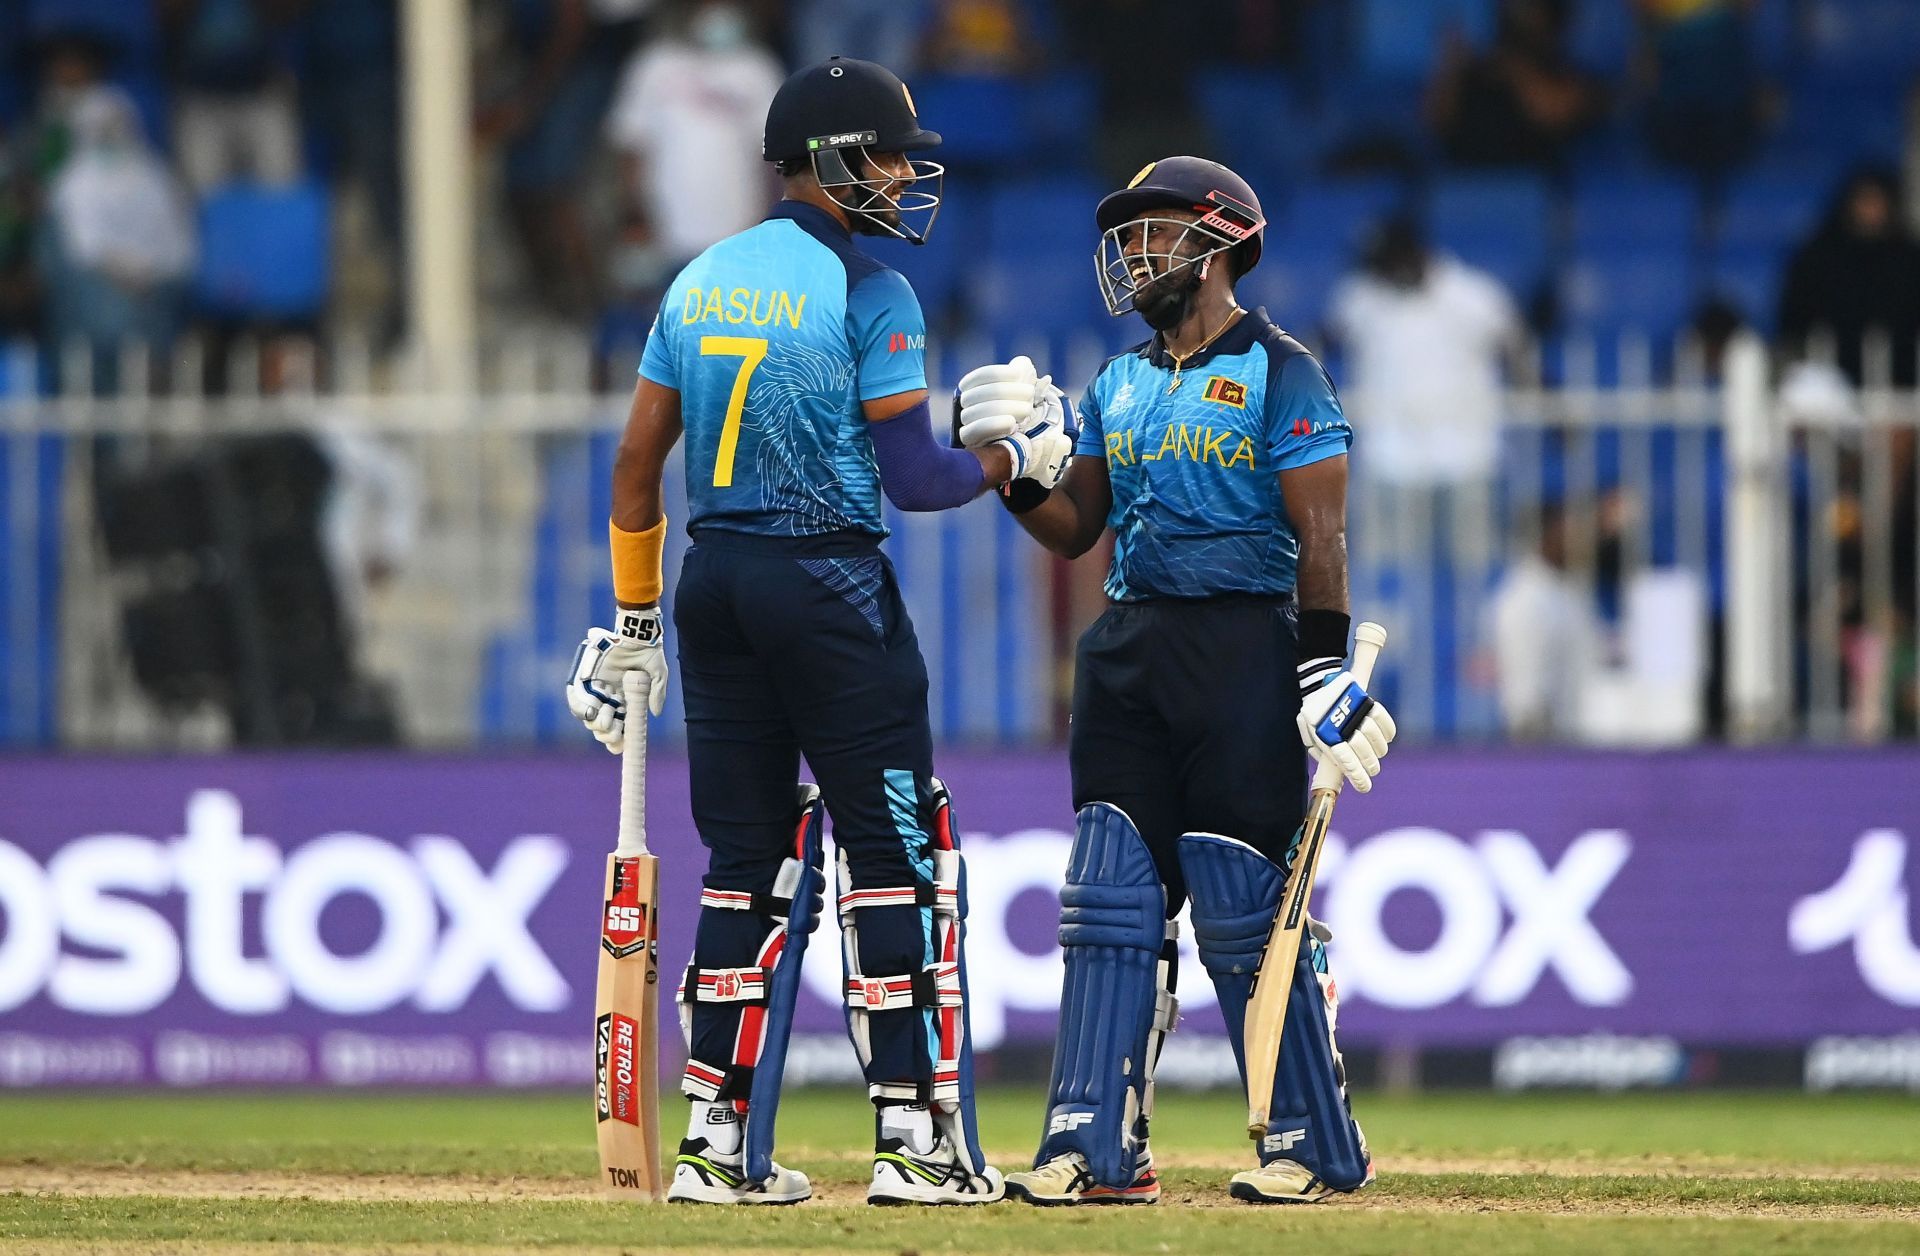 Aakash Chopra highlighted that Sri Lanka are gelling well as a unit